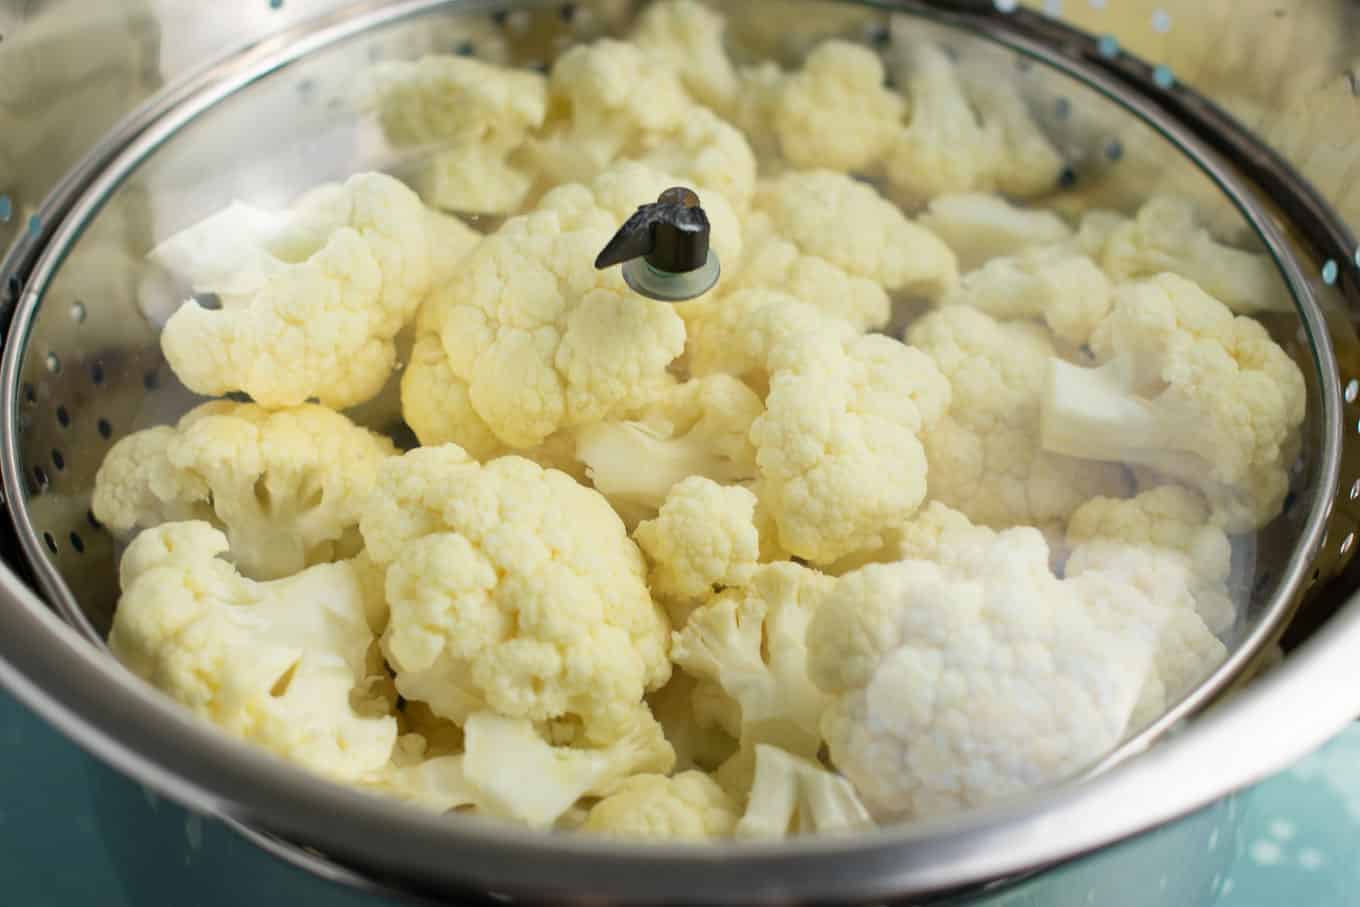 How to steam cauliflower with a pot, strainer, and lid